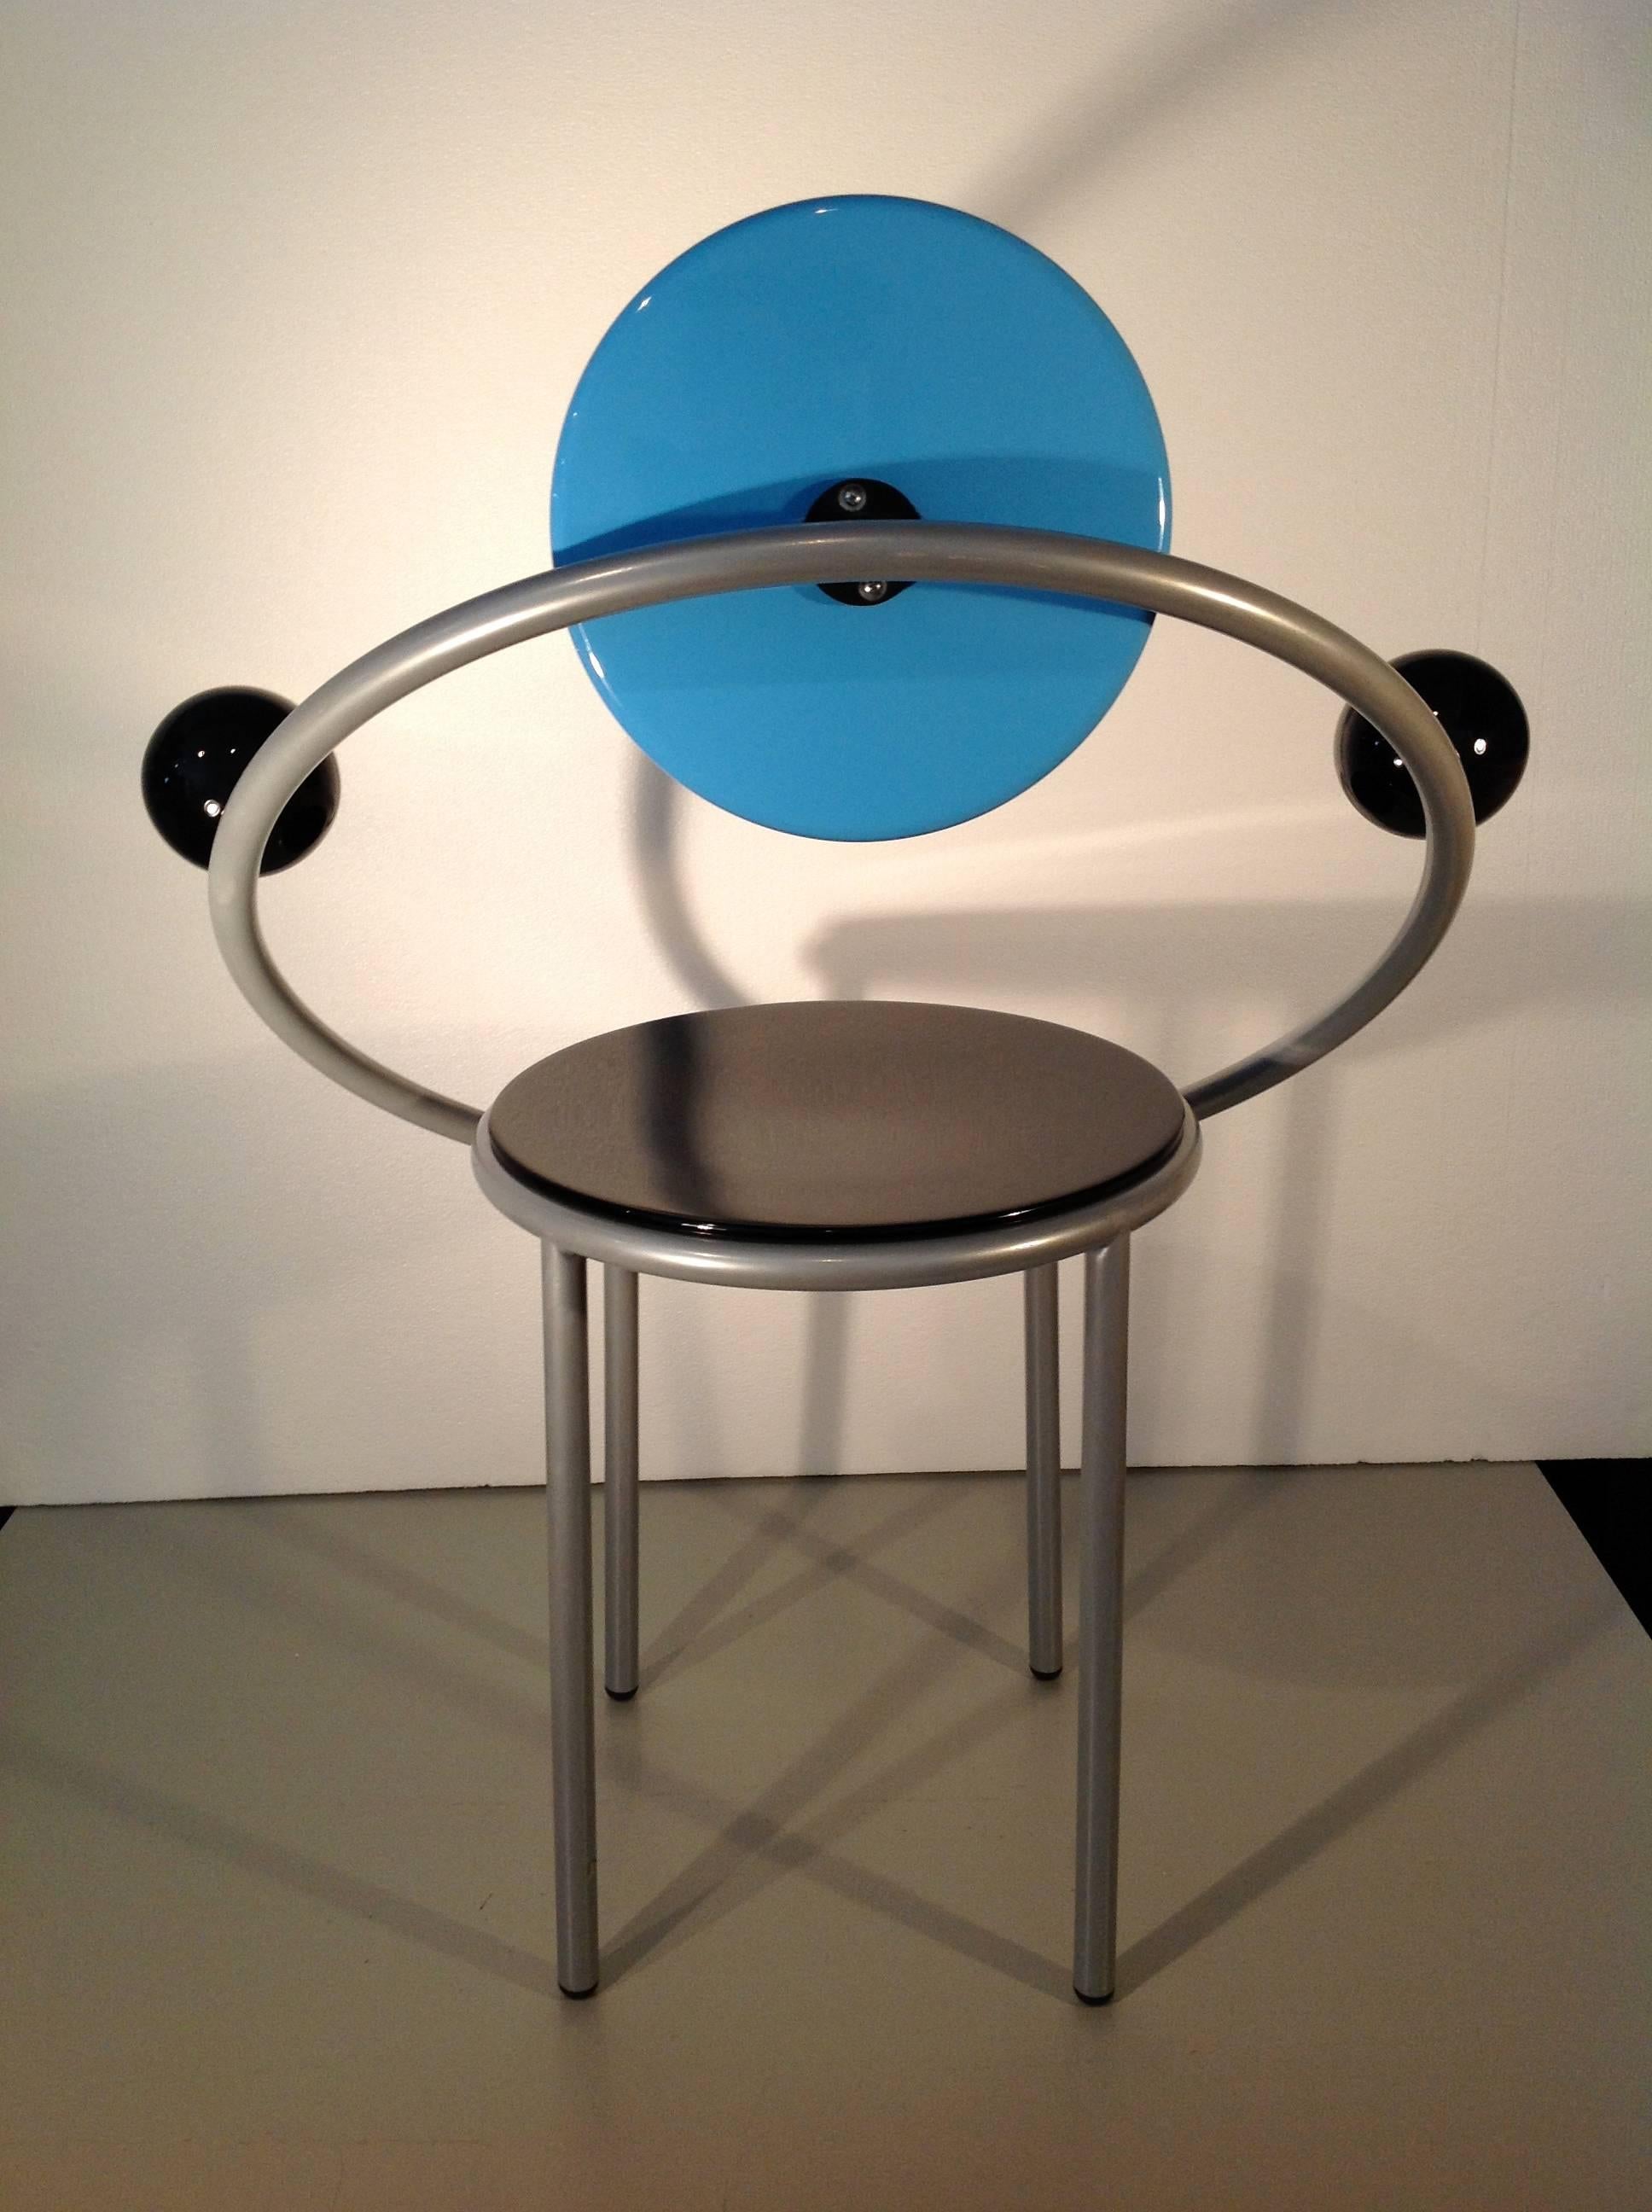 Memphis Group First Chair by Michele De Lucchi